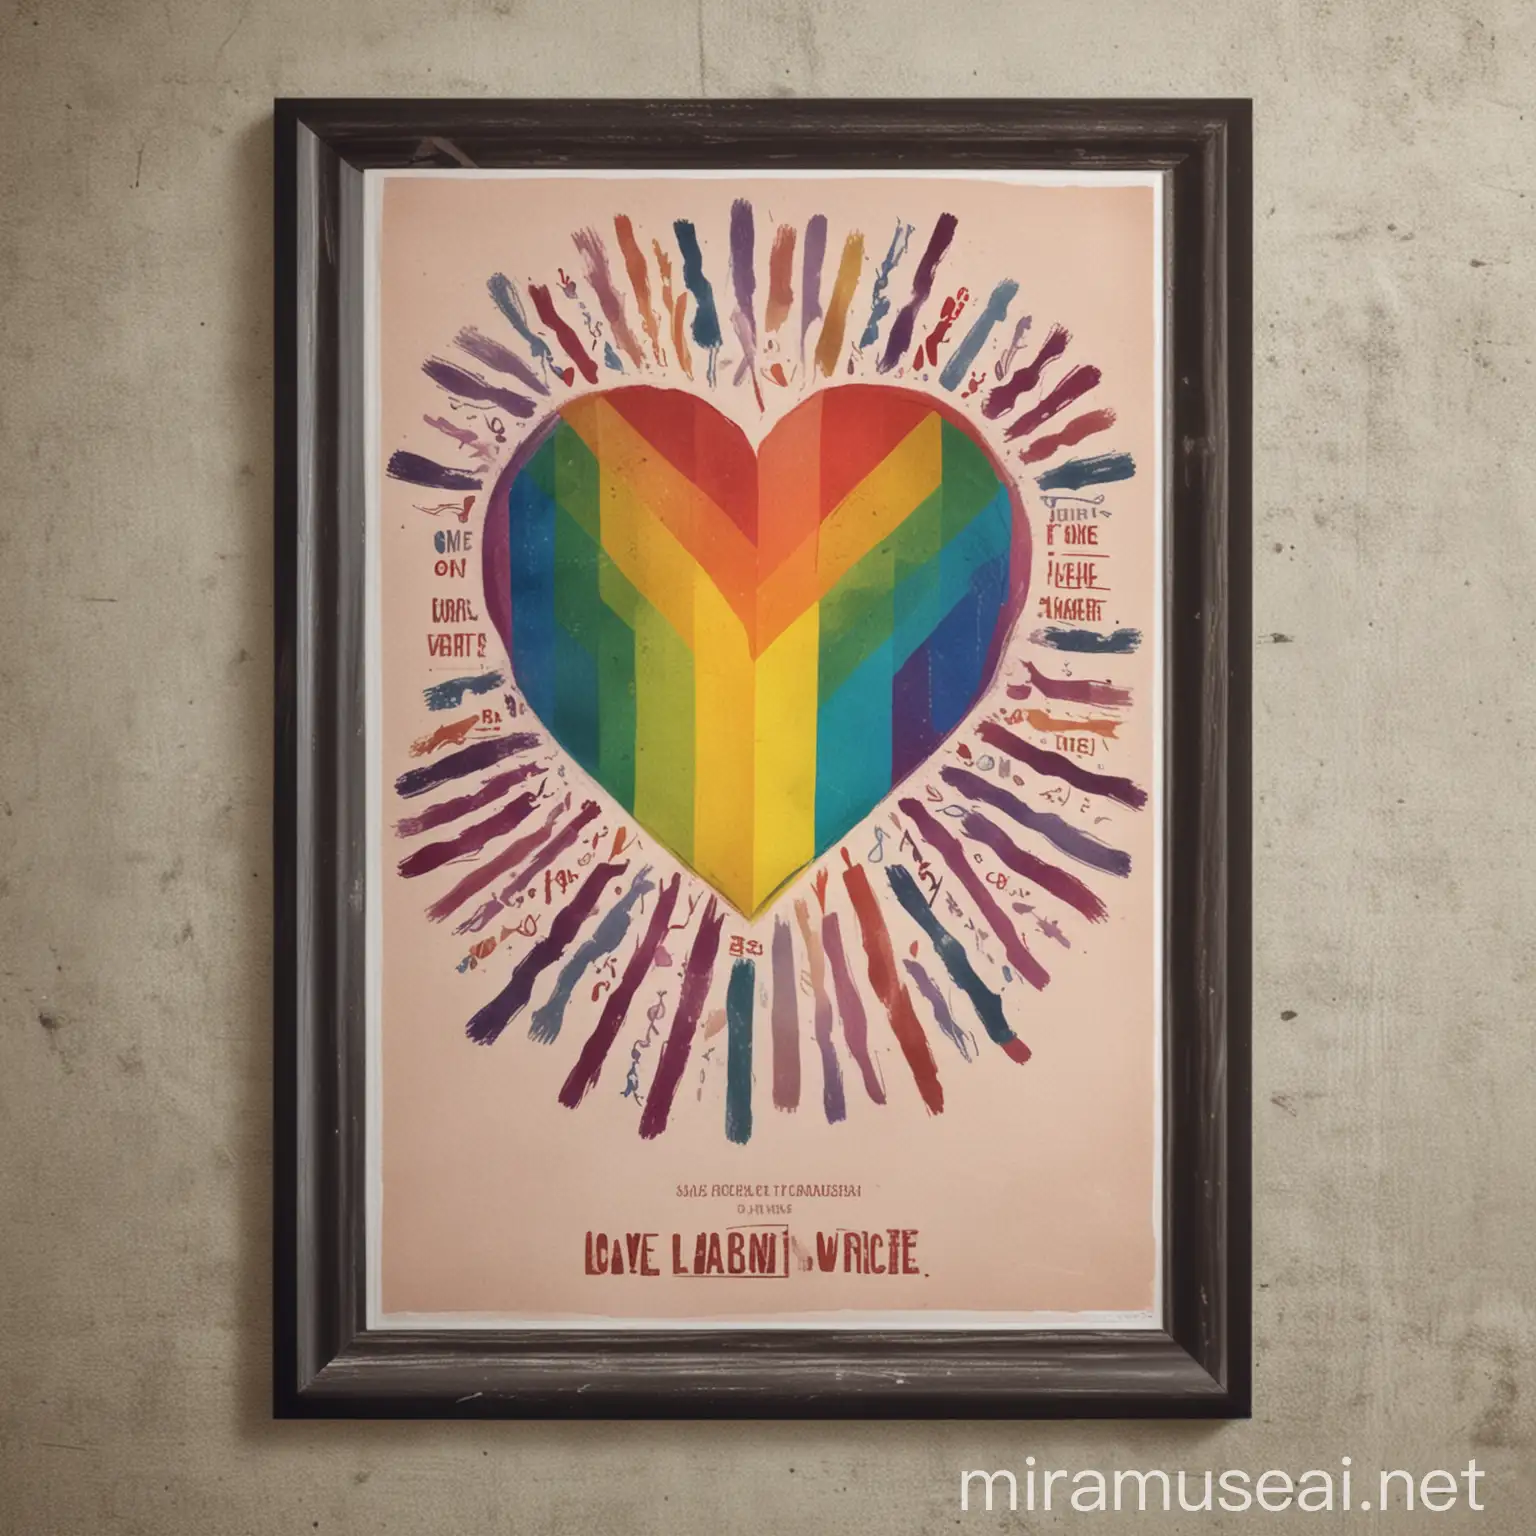 Create a poster that will promote the advancement of rights the LGBTQ+ community. 